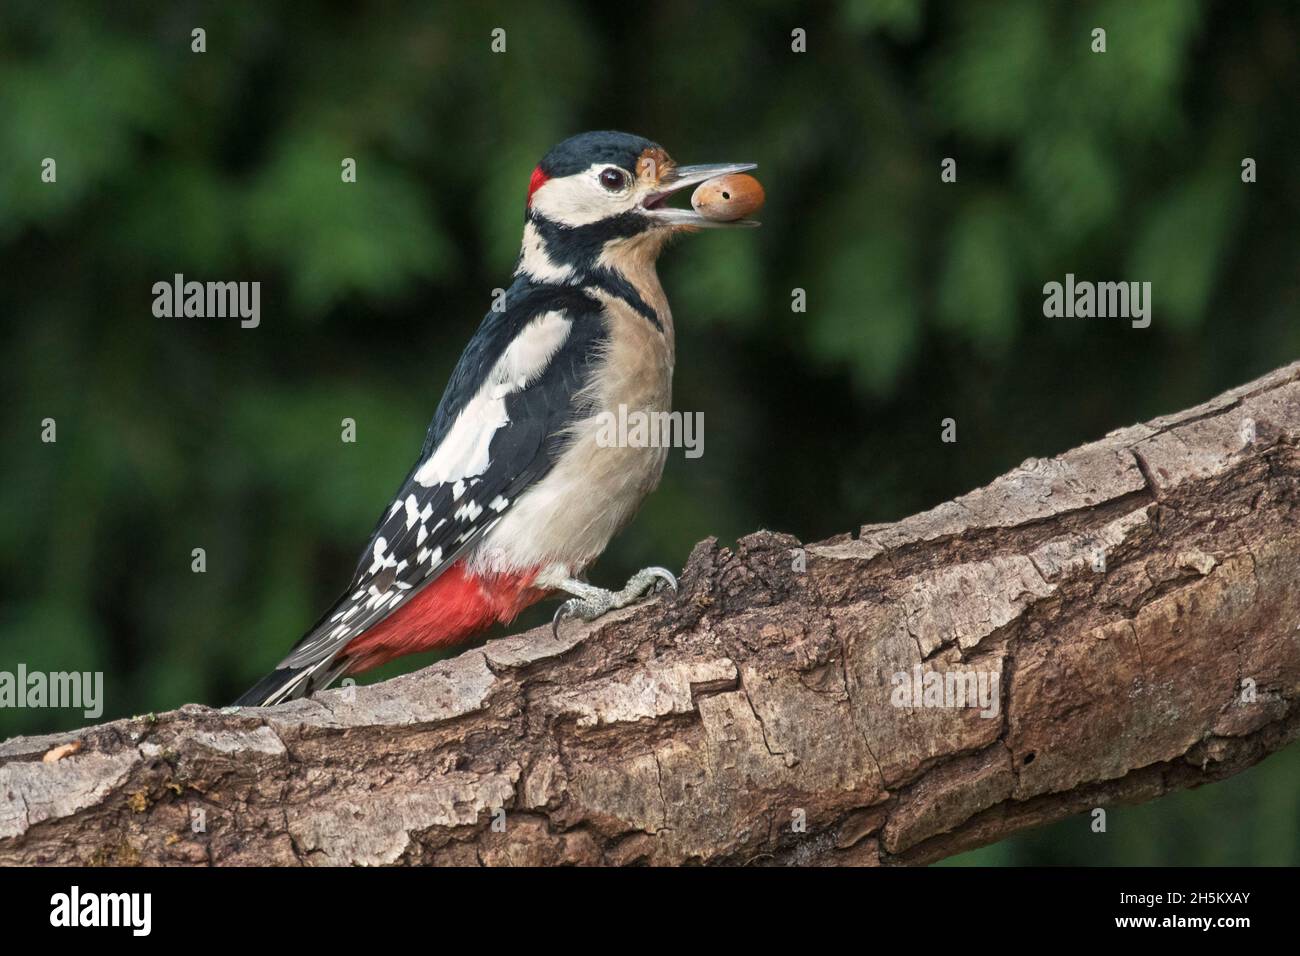 Great spotted woodpecker / greater spotted woodpecker (Dendrocopos major) male perched on branch with hazelnut in beak Stock Photo